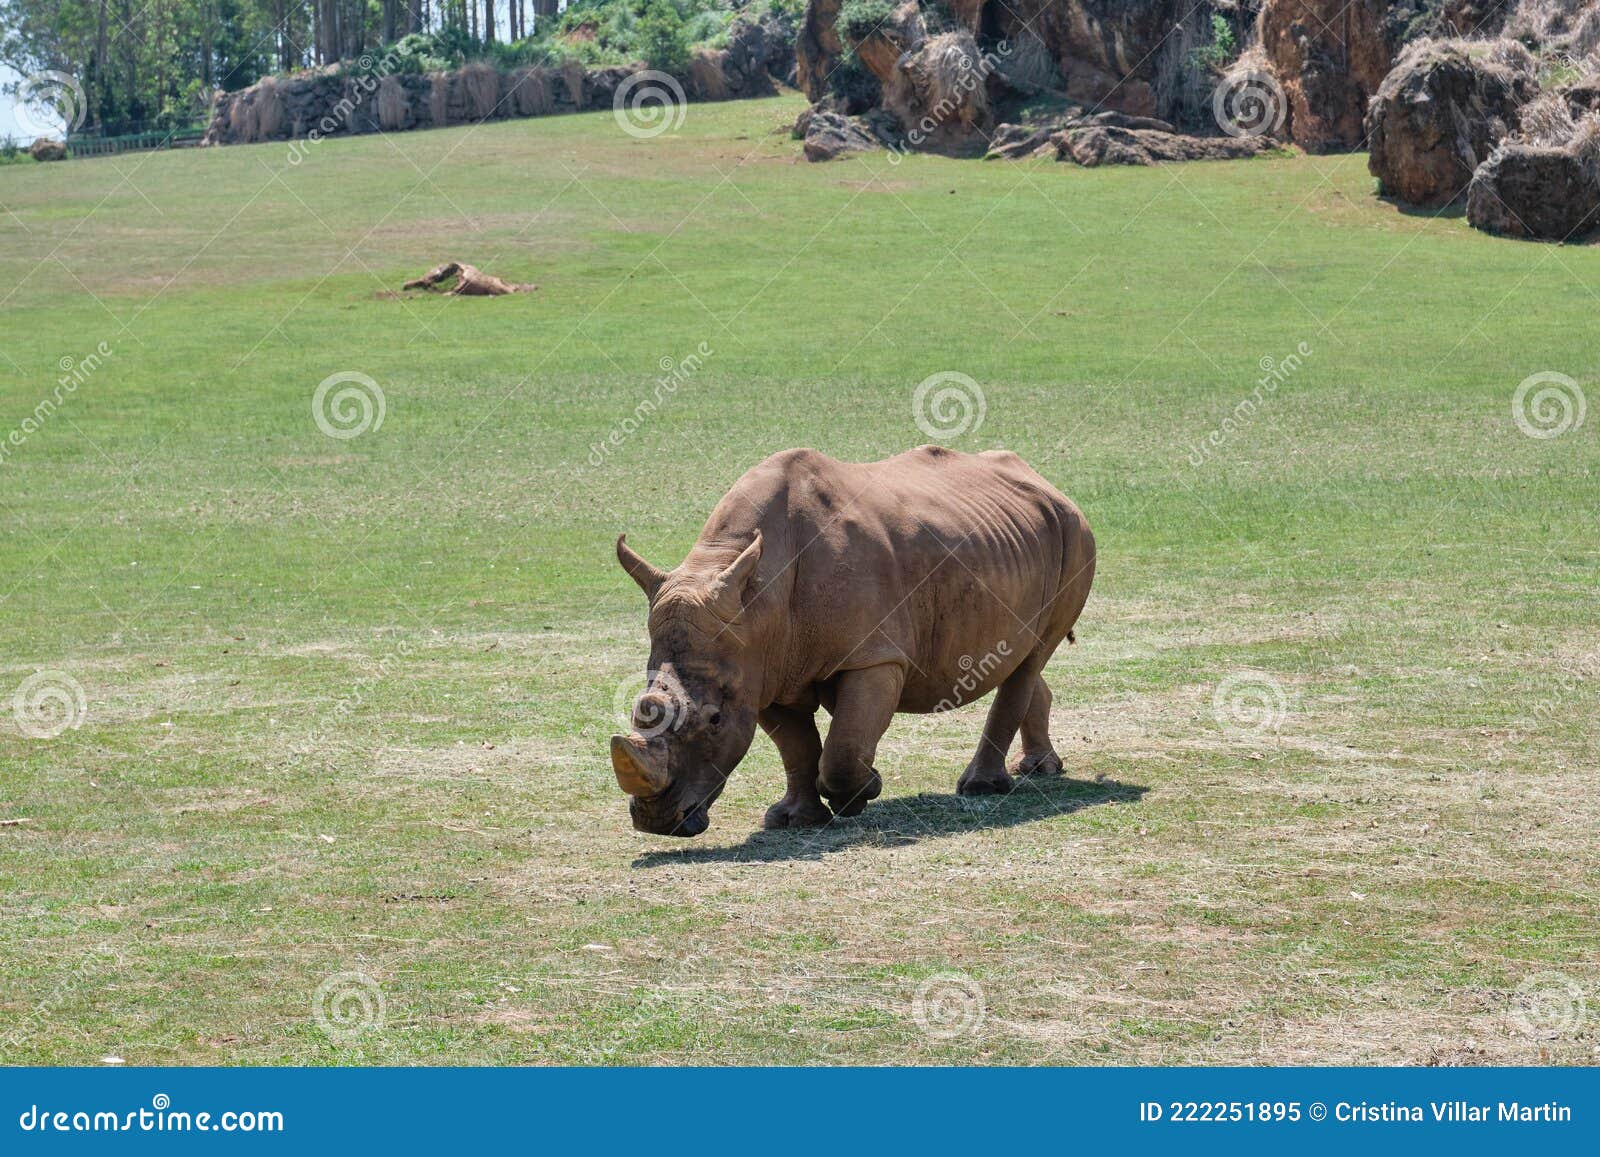 a rhinoceros eating grass in cabarceno natural park in cantabria